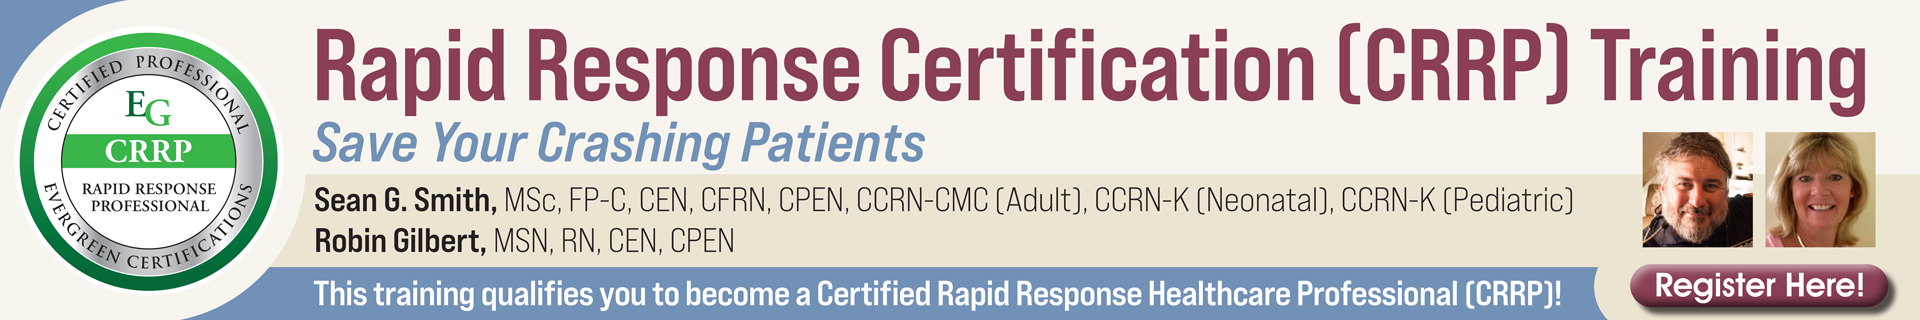 Rapid Response Certification (CRRP) Training: Save Your Crashing Patients